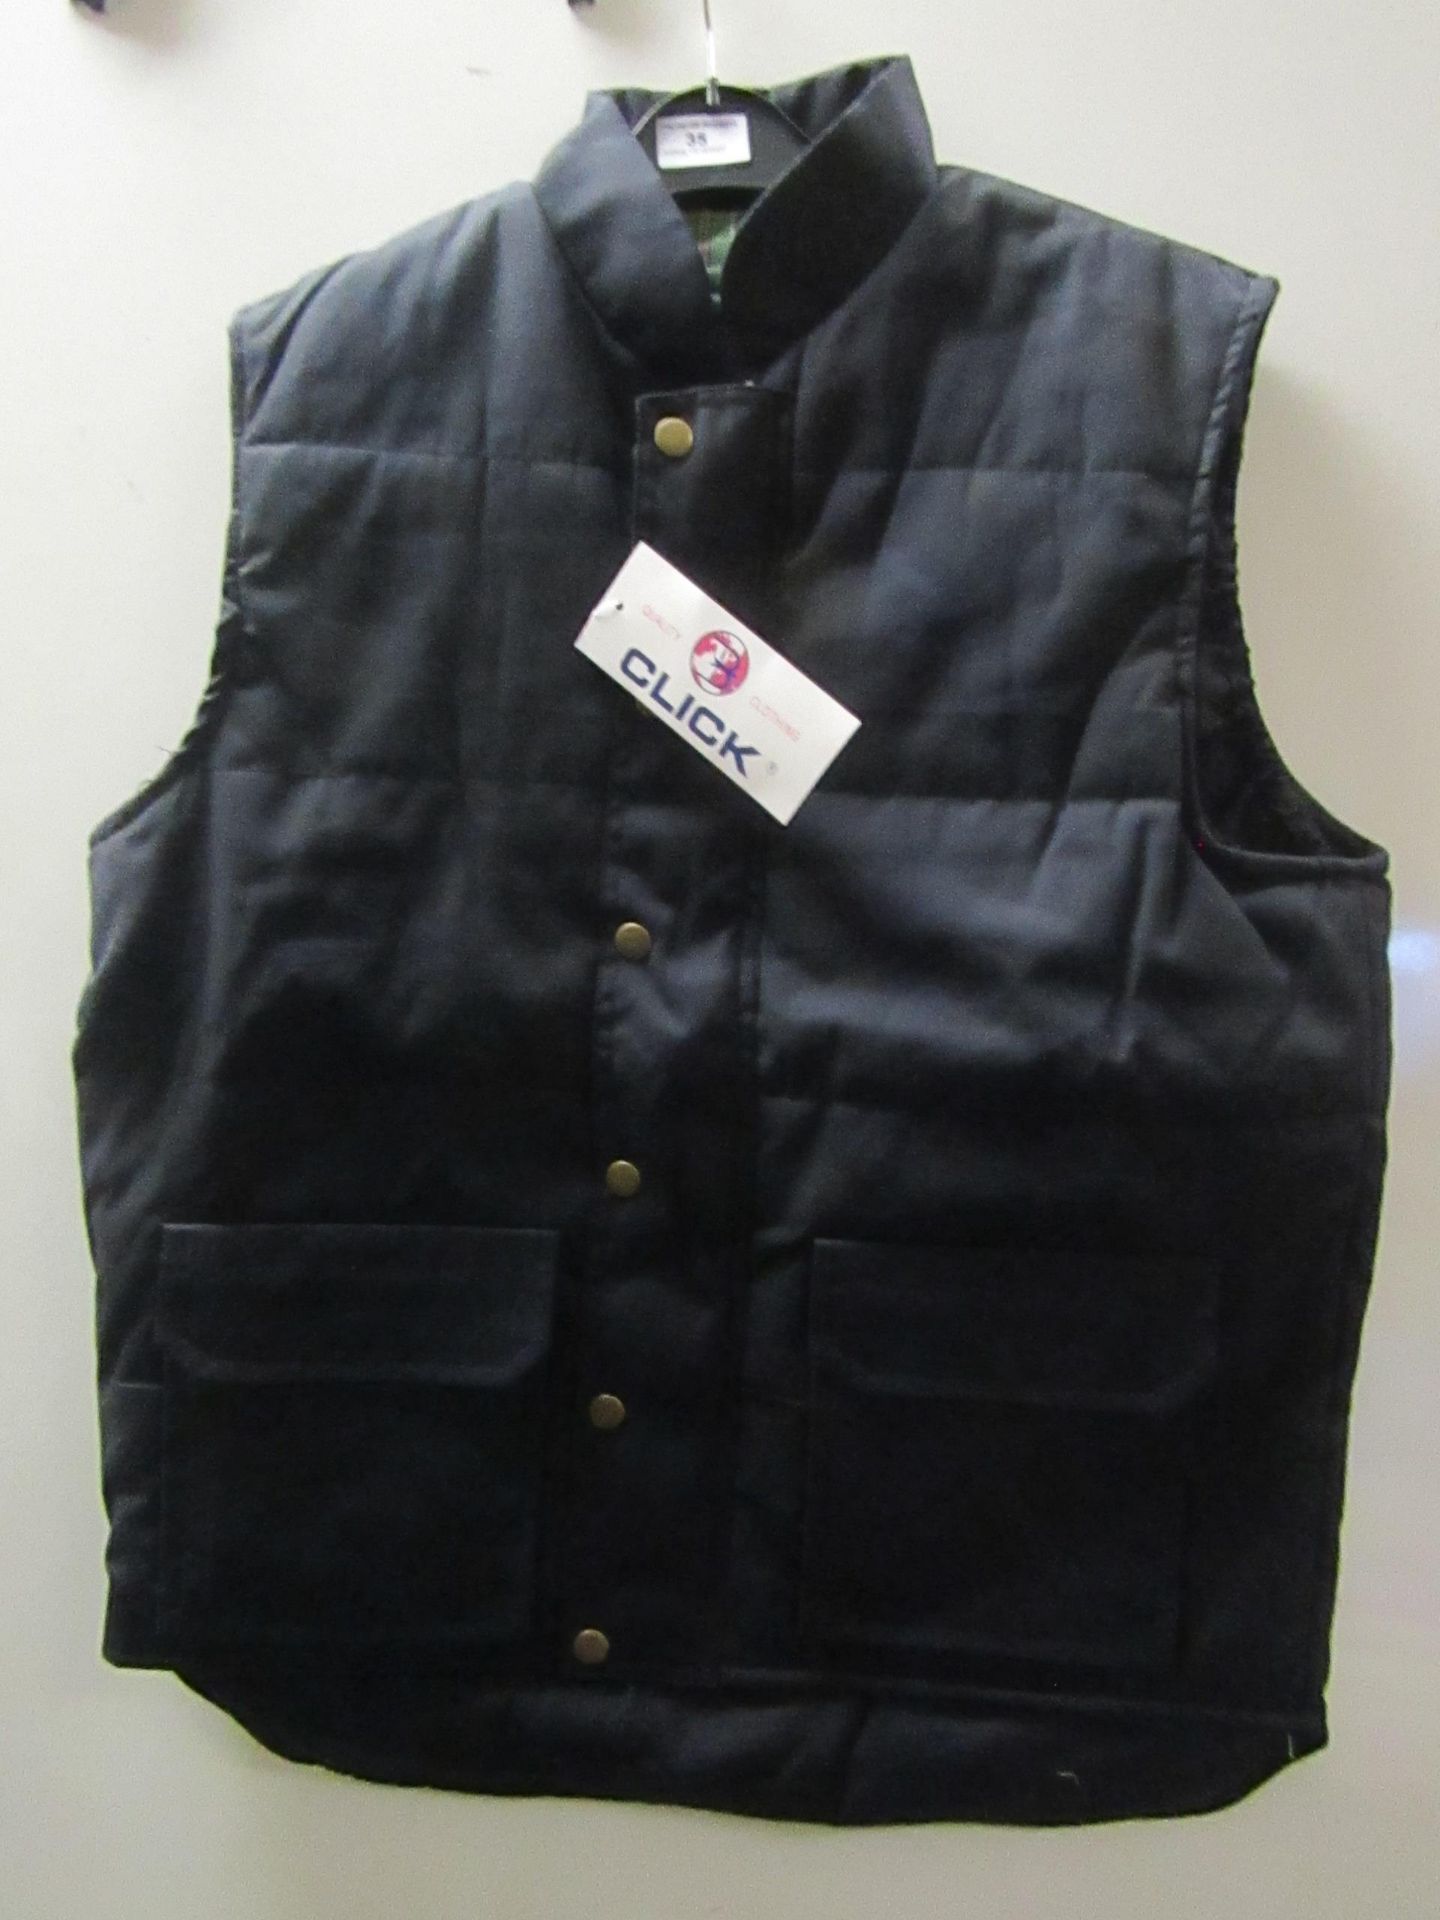 Click Body Warmer Navy size S New with Tags